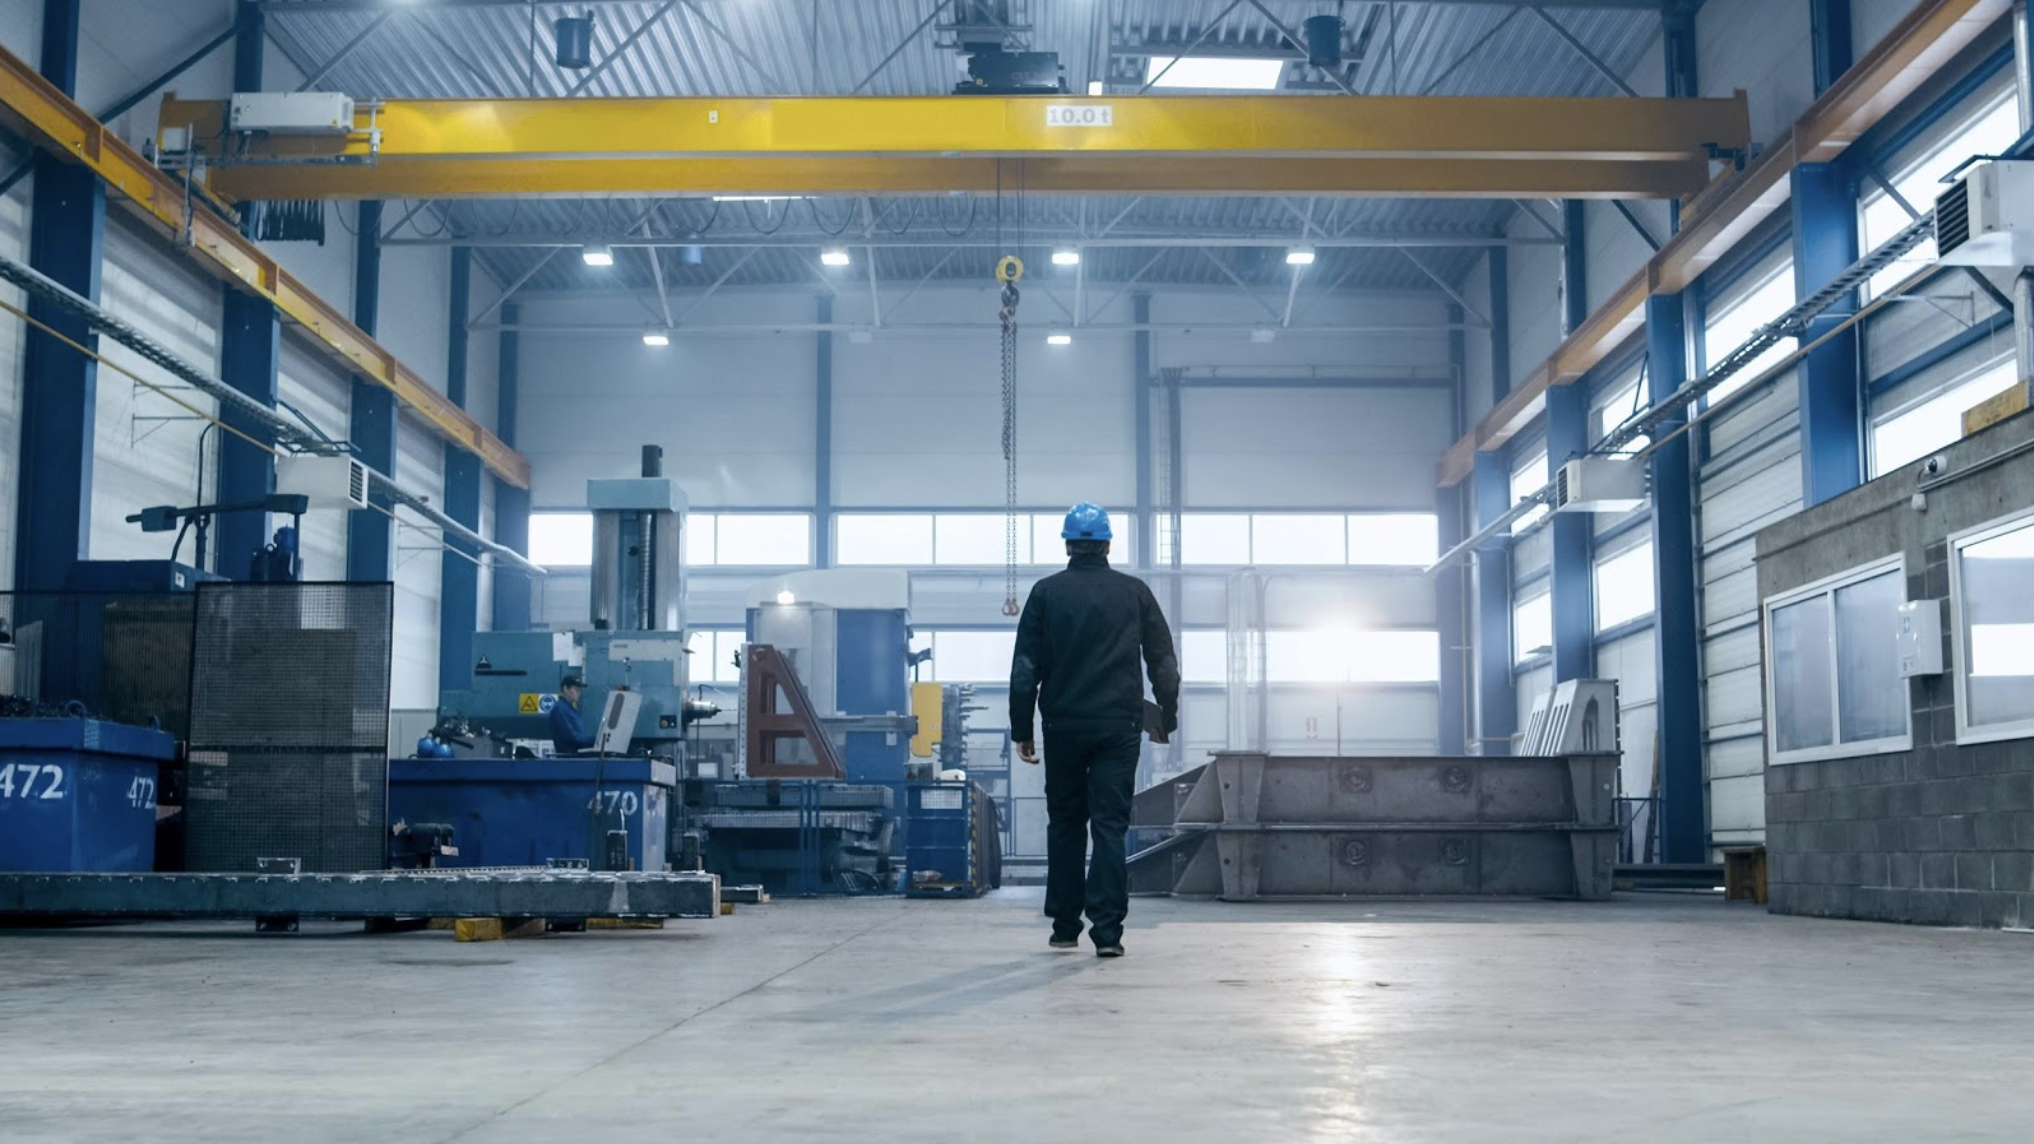 a man in a hardhat walks through an industrial production warehouse